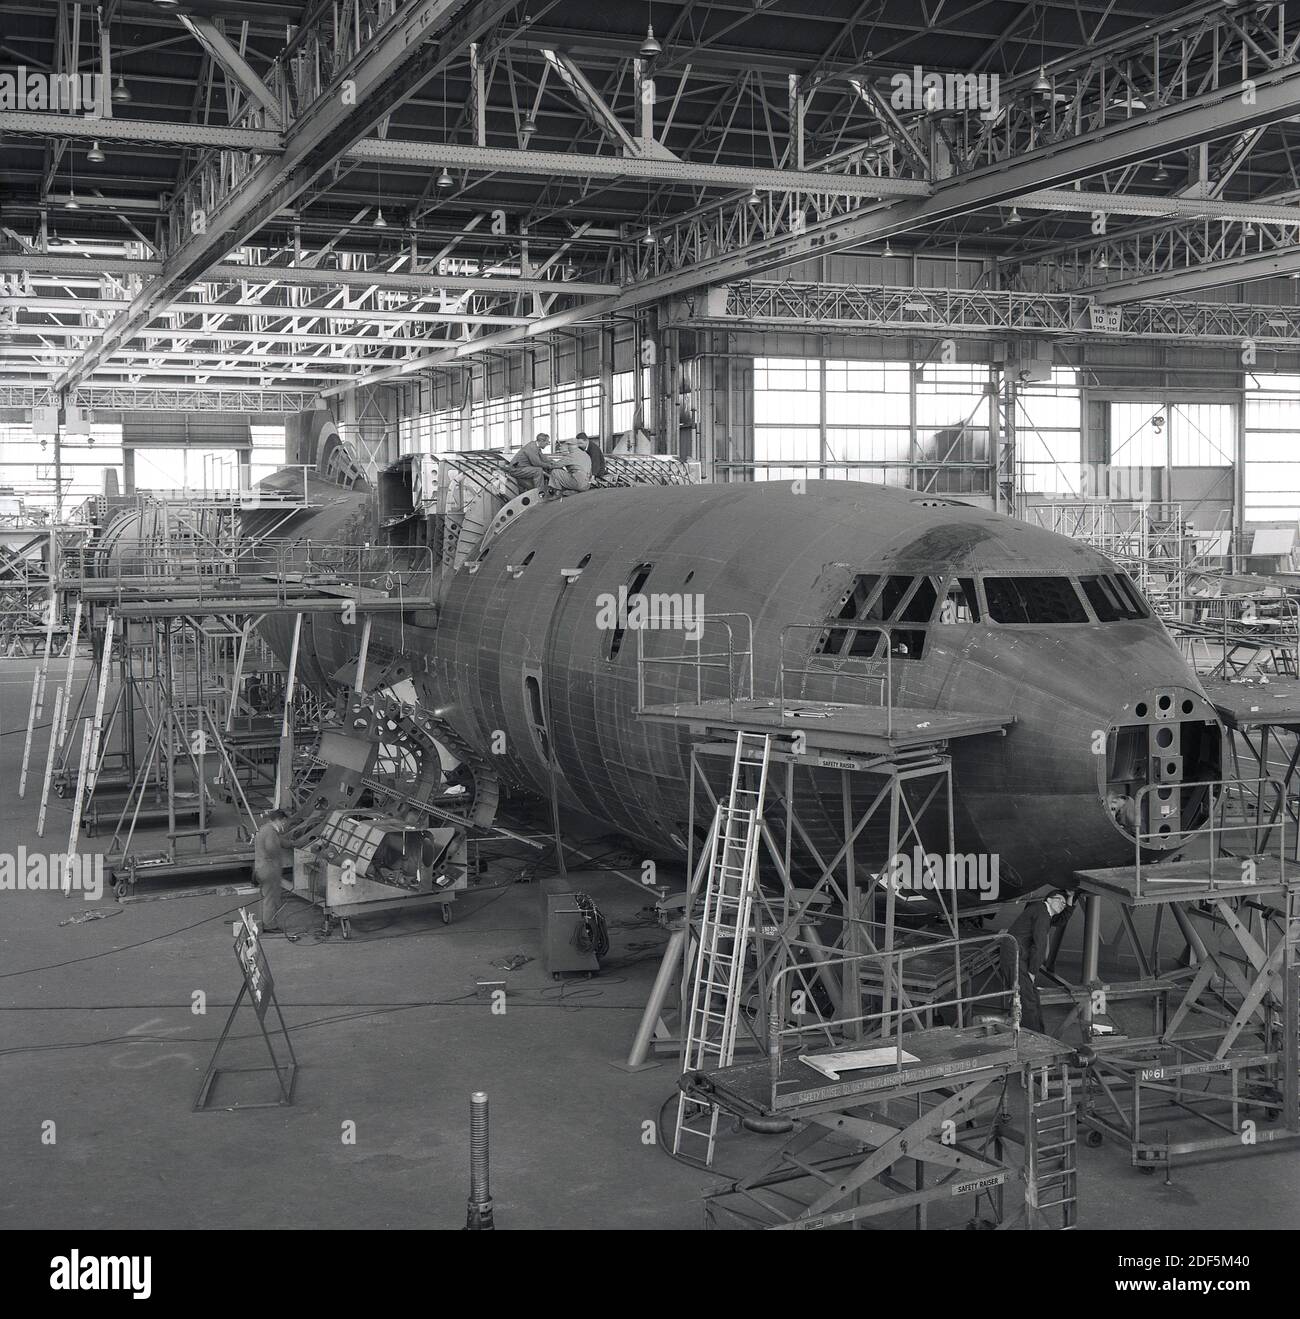 1950s, historical, inside a large aviation hangar, a commerical aircraft being constructed, England, UK. Picture shows the nose or cockpit, with technicans working on the foor and on top of the aeroplane. Stock Photo